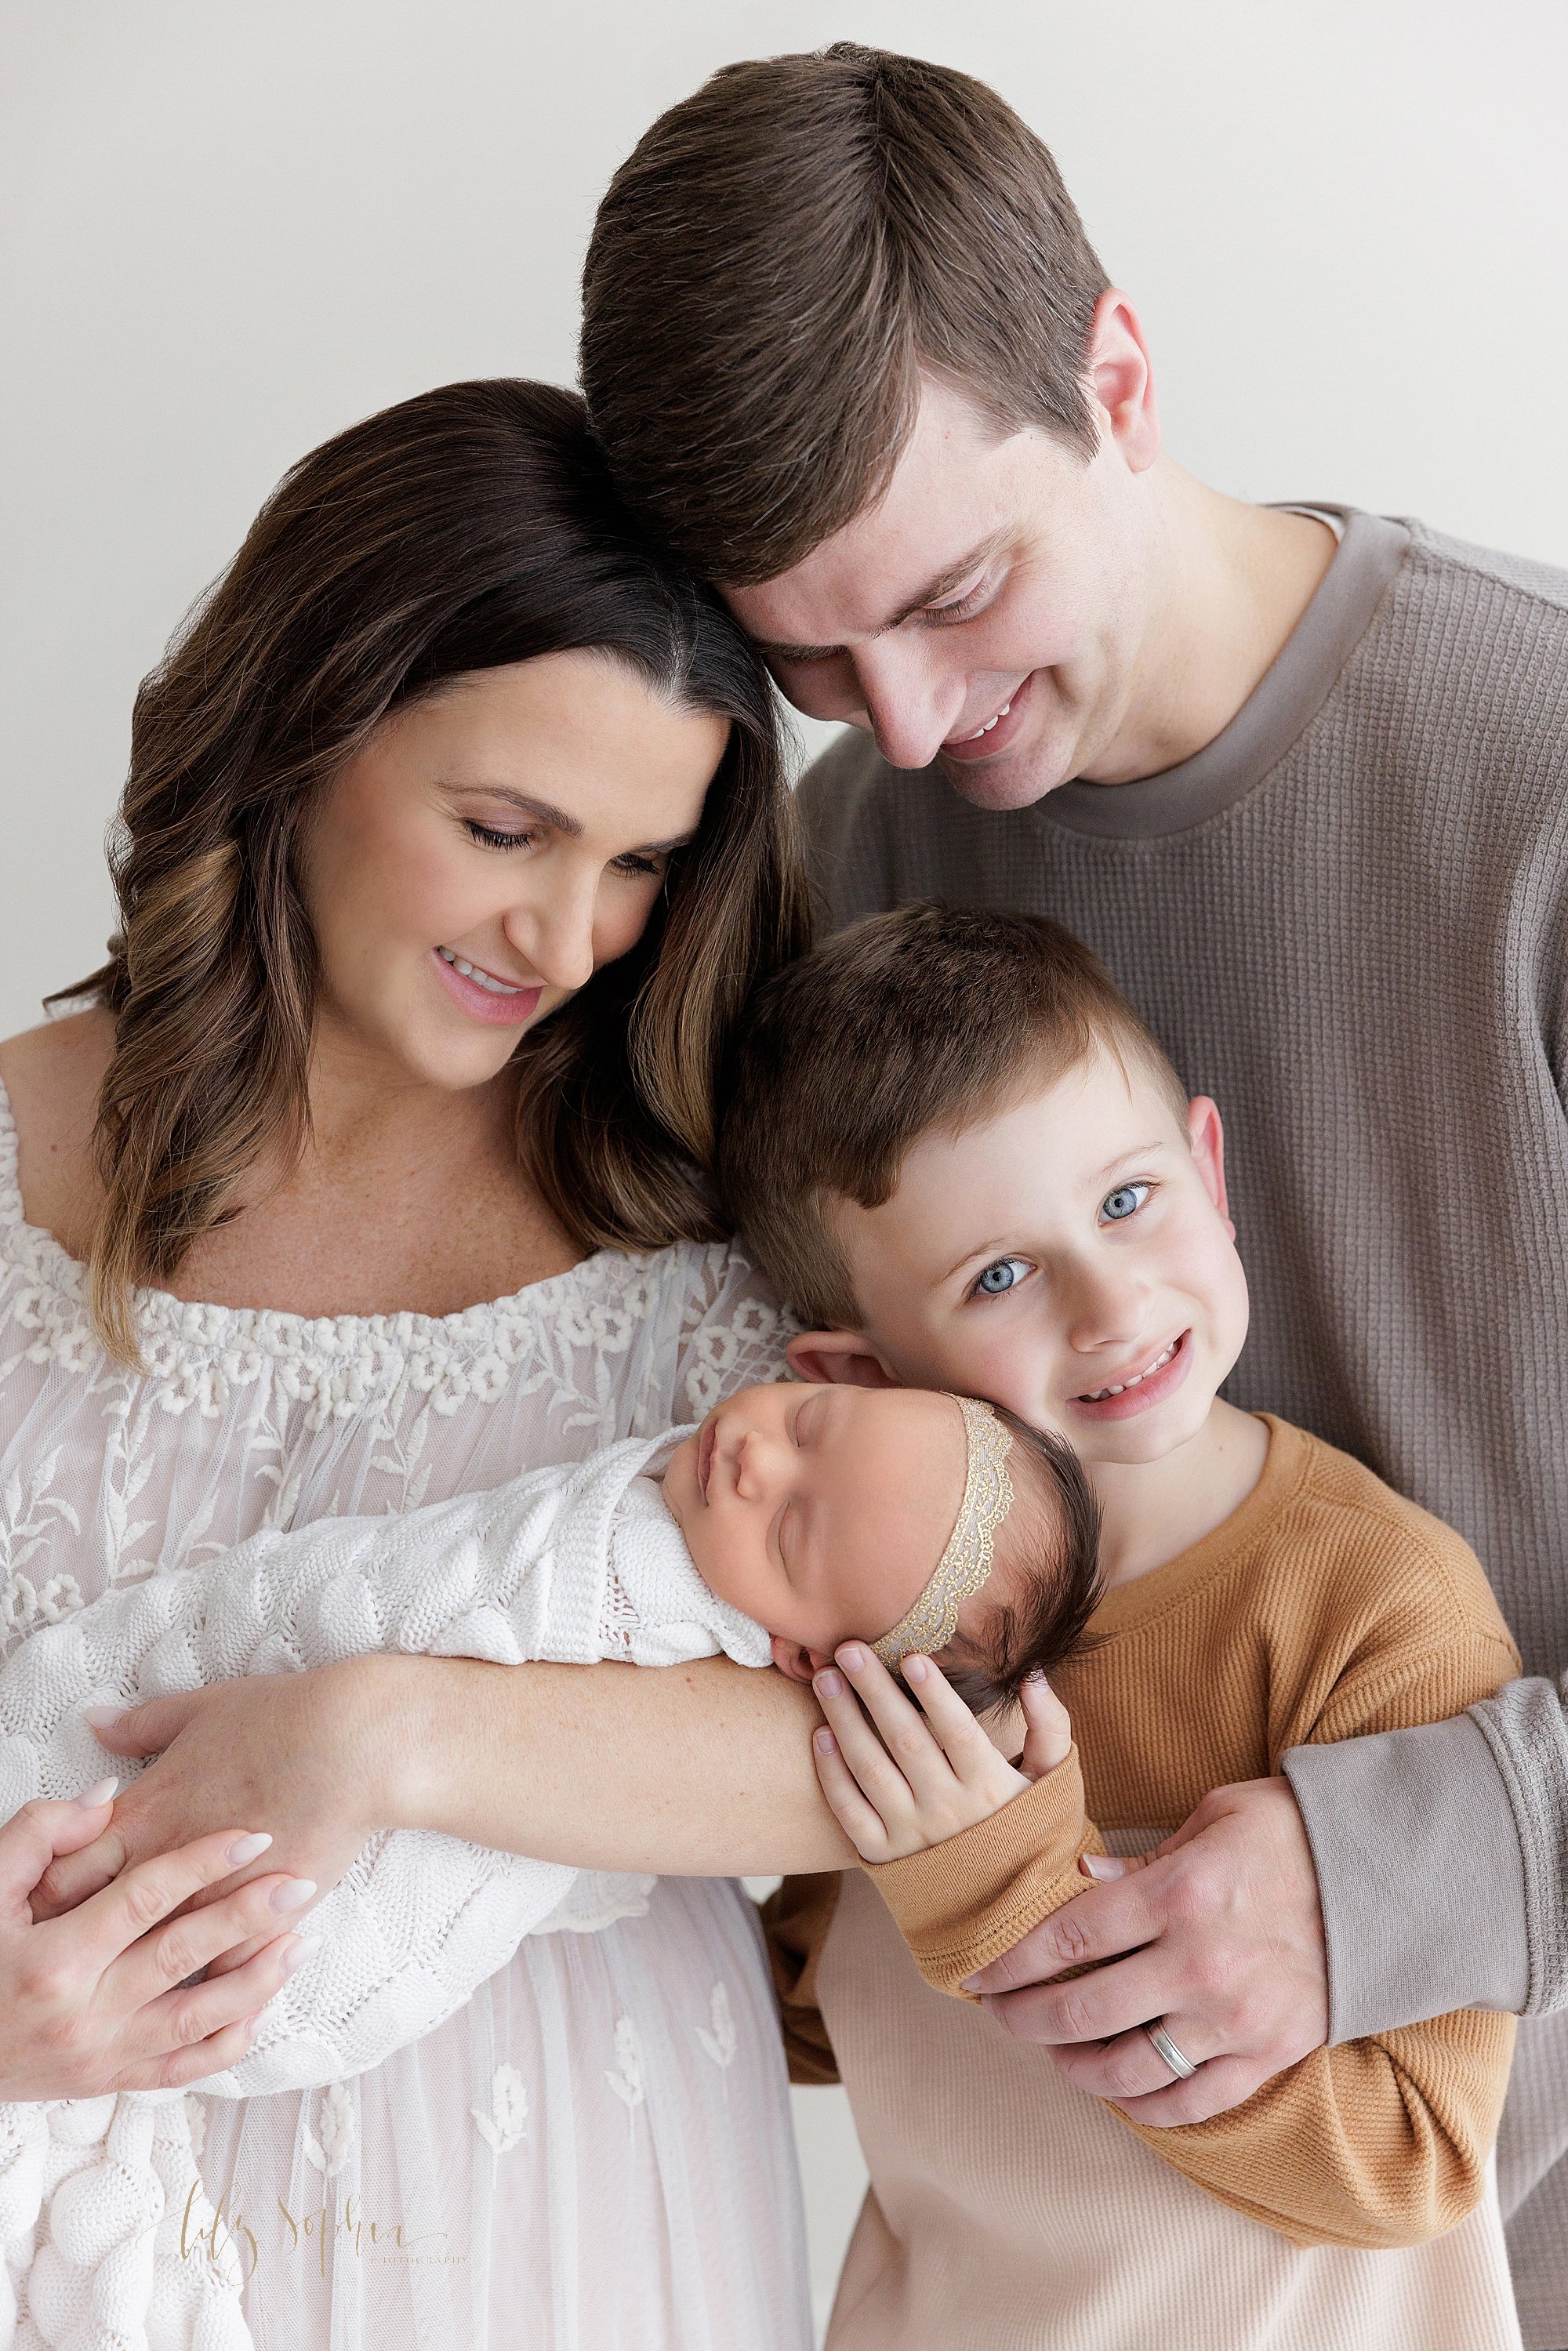  Family newborn photo with mom holding her peacefully sleeping newborn baby girl in her arms as her son places his cheek  against his sister’s head and dad stands behind his son as mom and dad look at their daughter taken in natural light in a photog